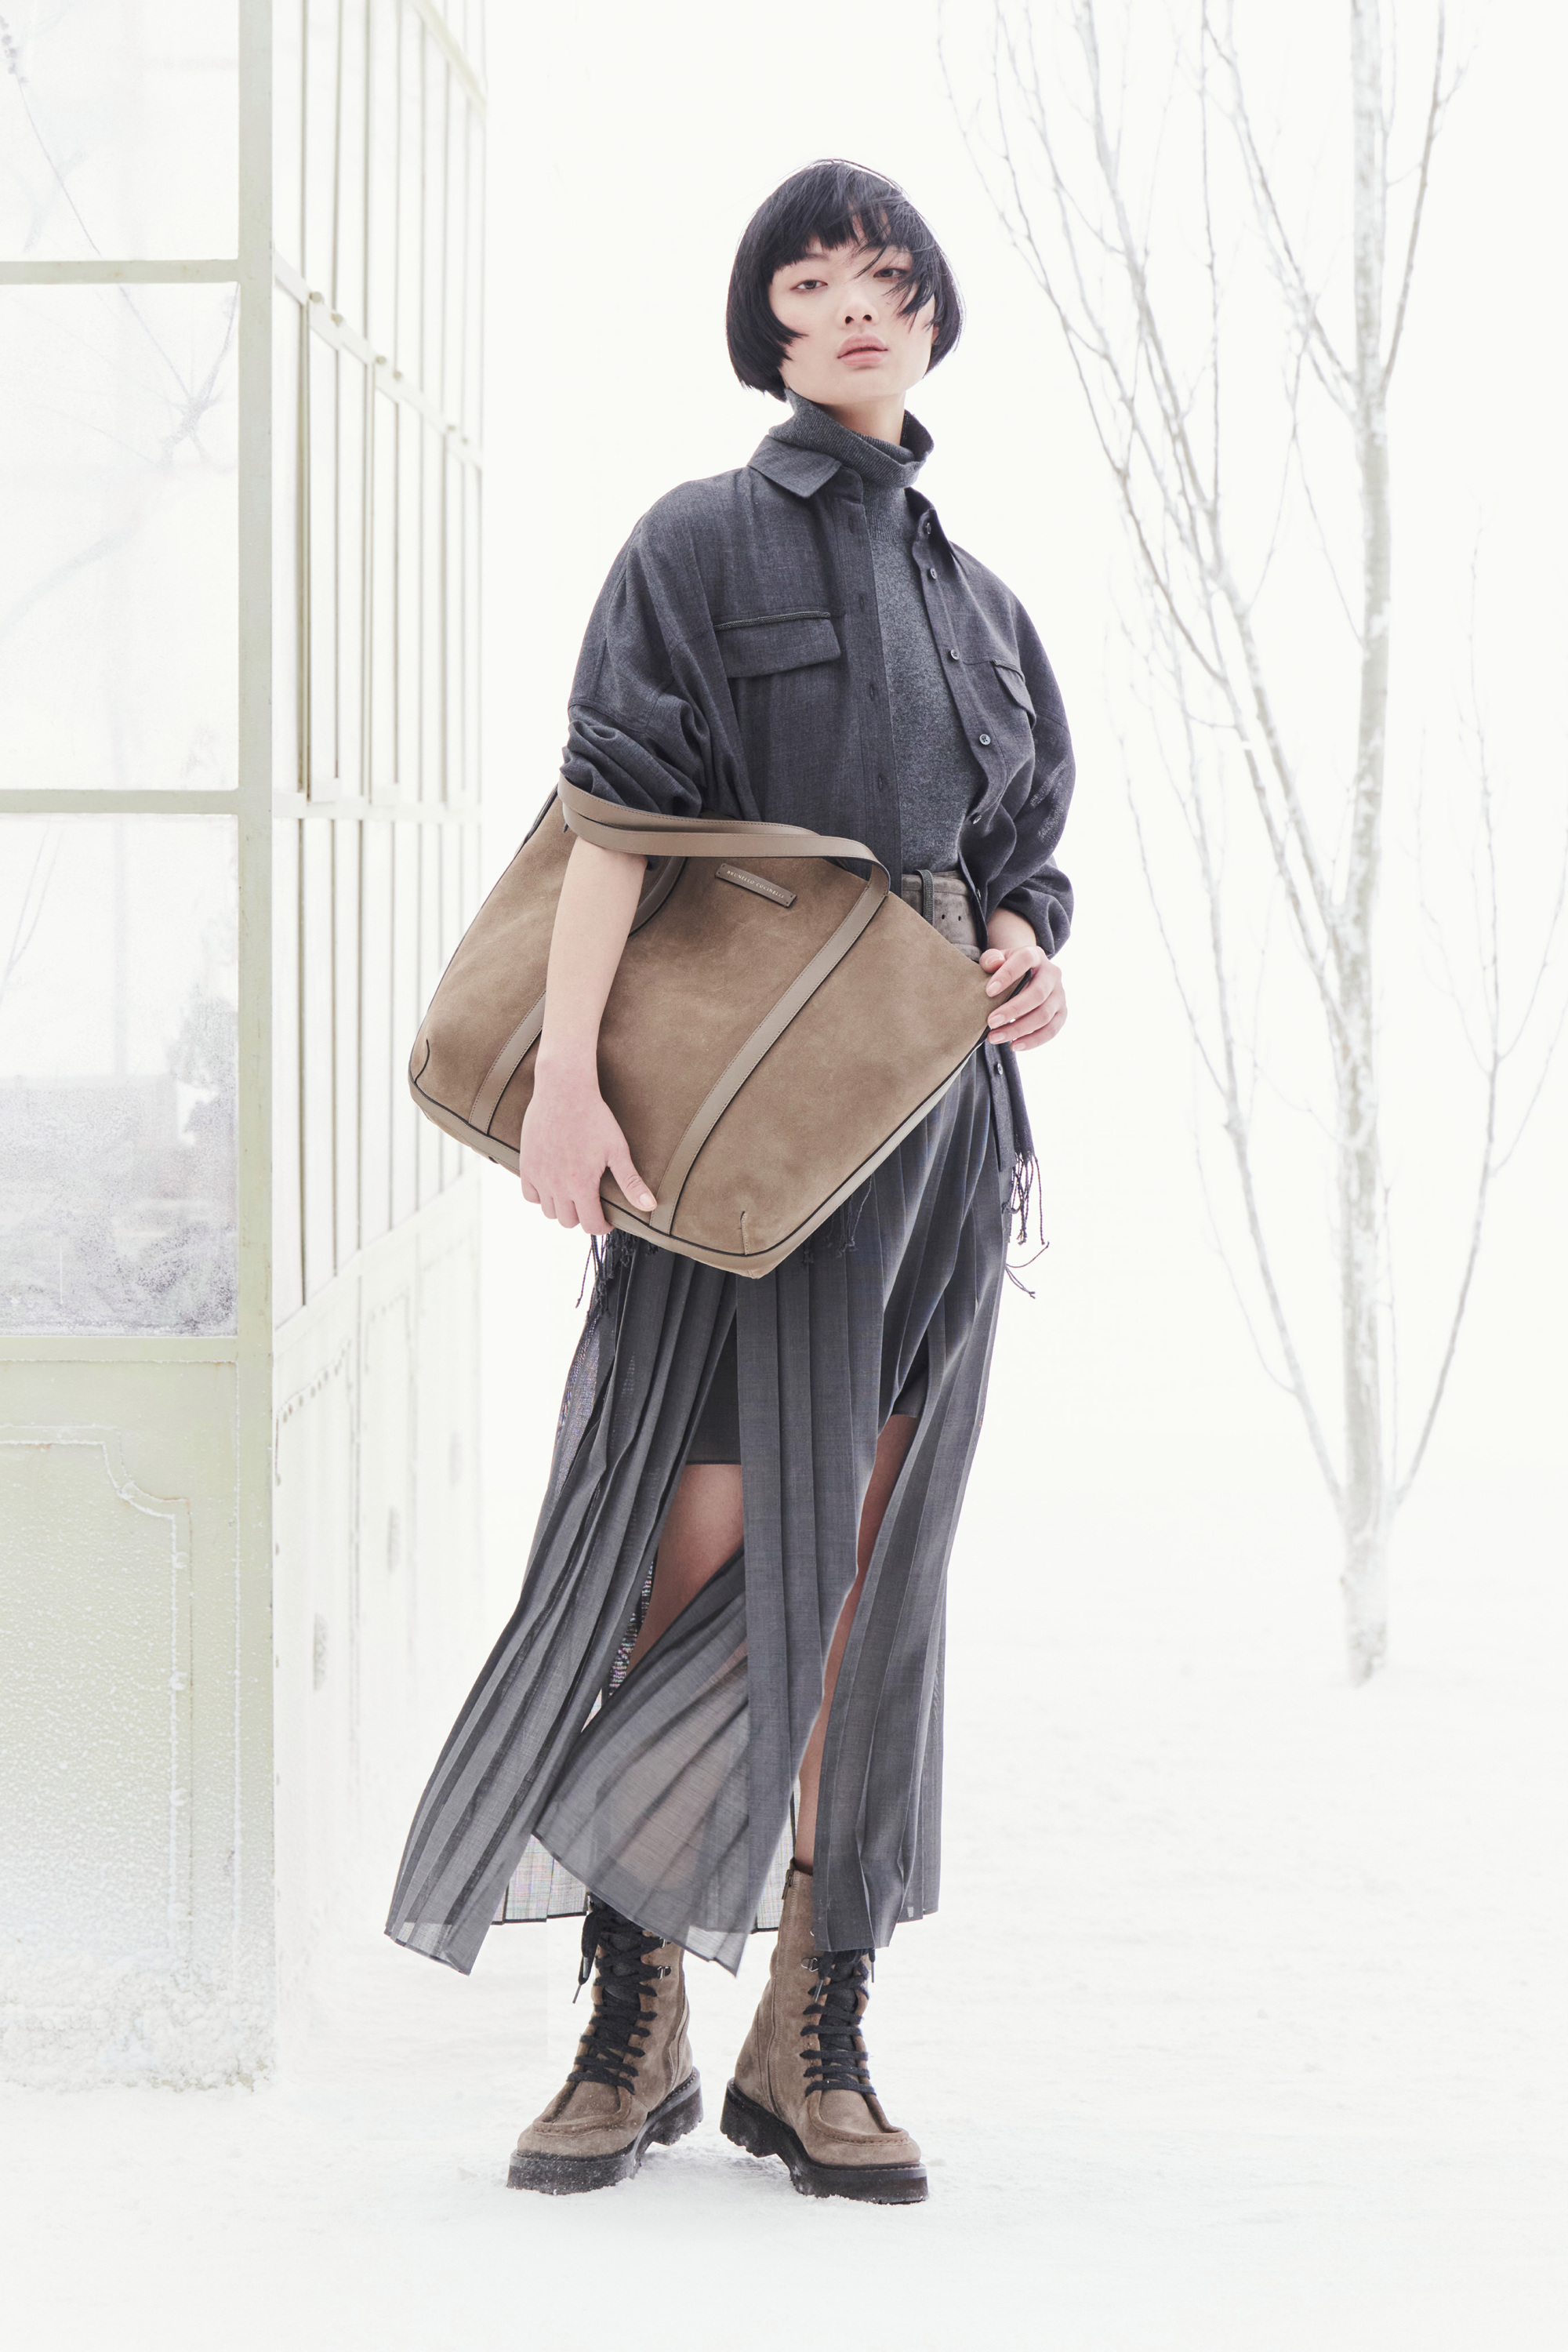 Brunello Cucinelli AW21: 'Let's replace fear with hope